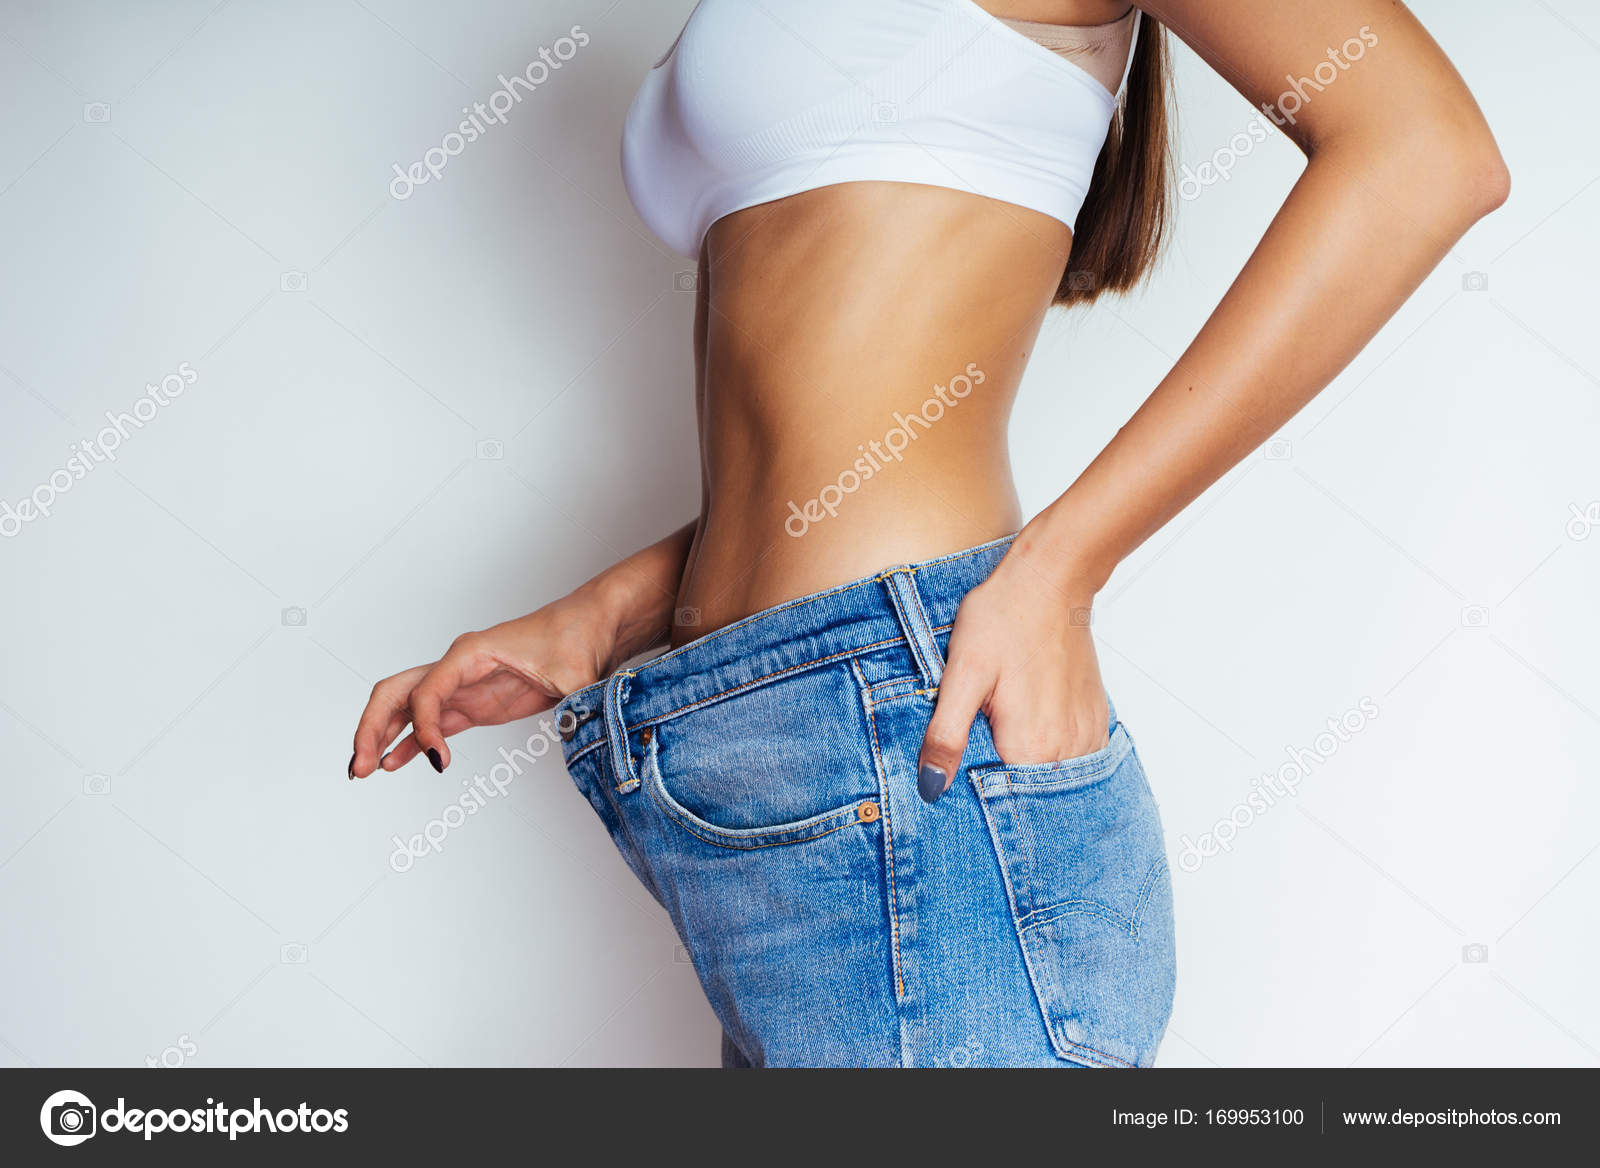 A young athletic girl shows her flat stomach, quickly lost weight